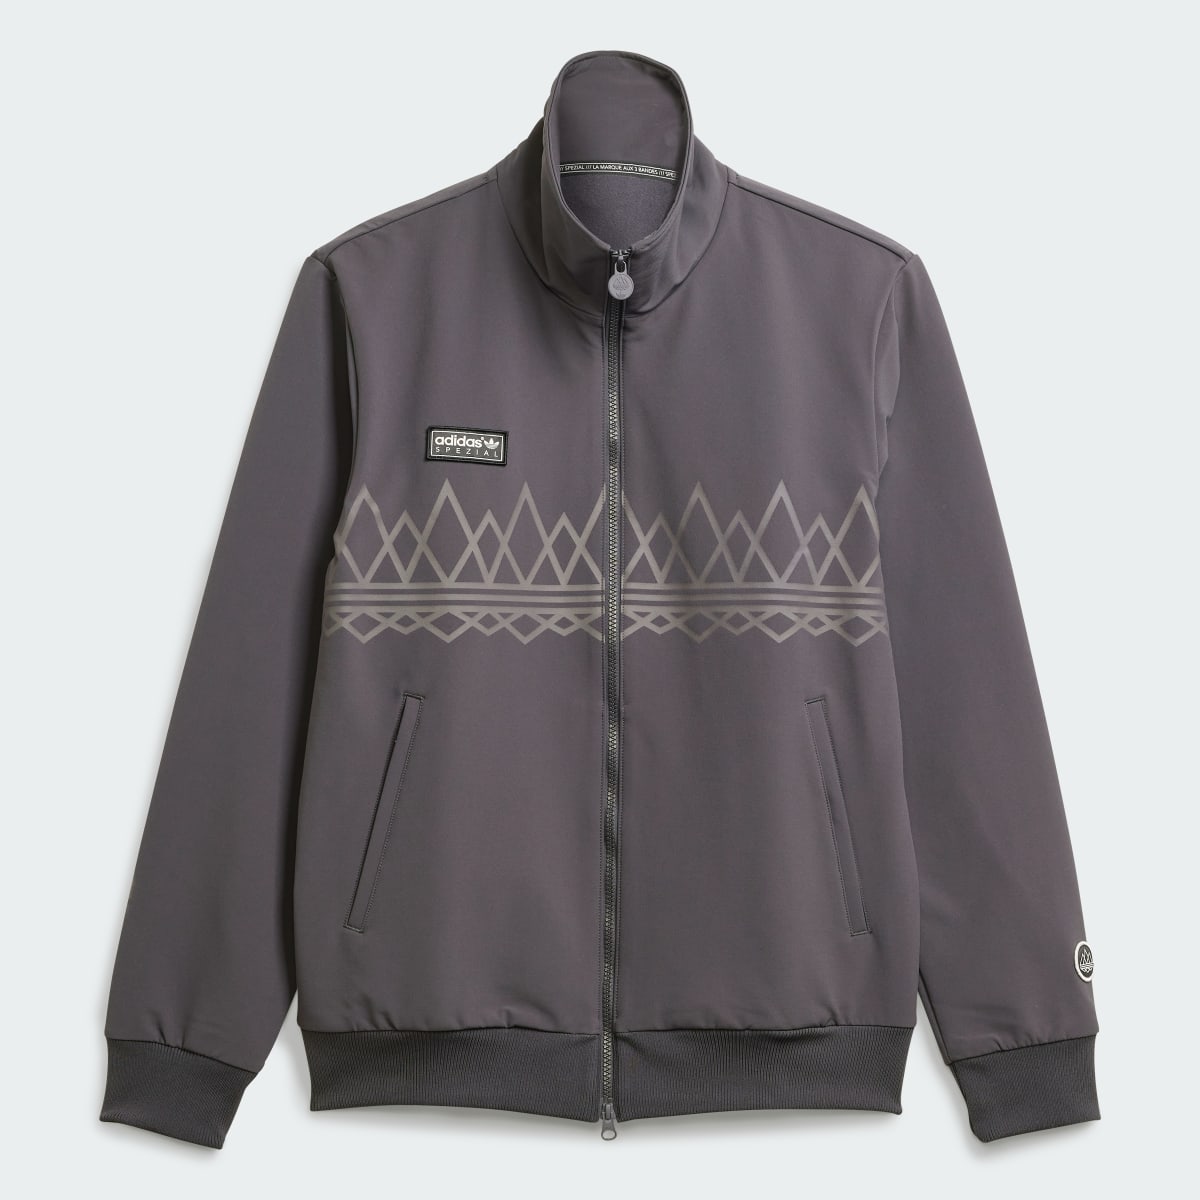 Adidas Suddell Track Top. 6